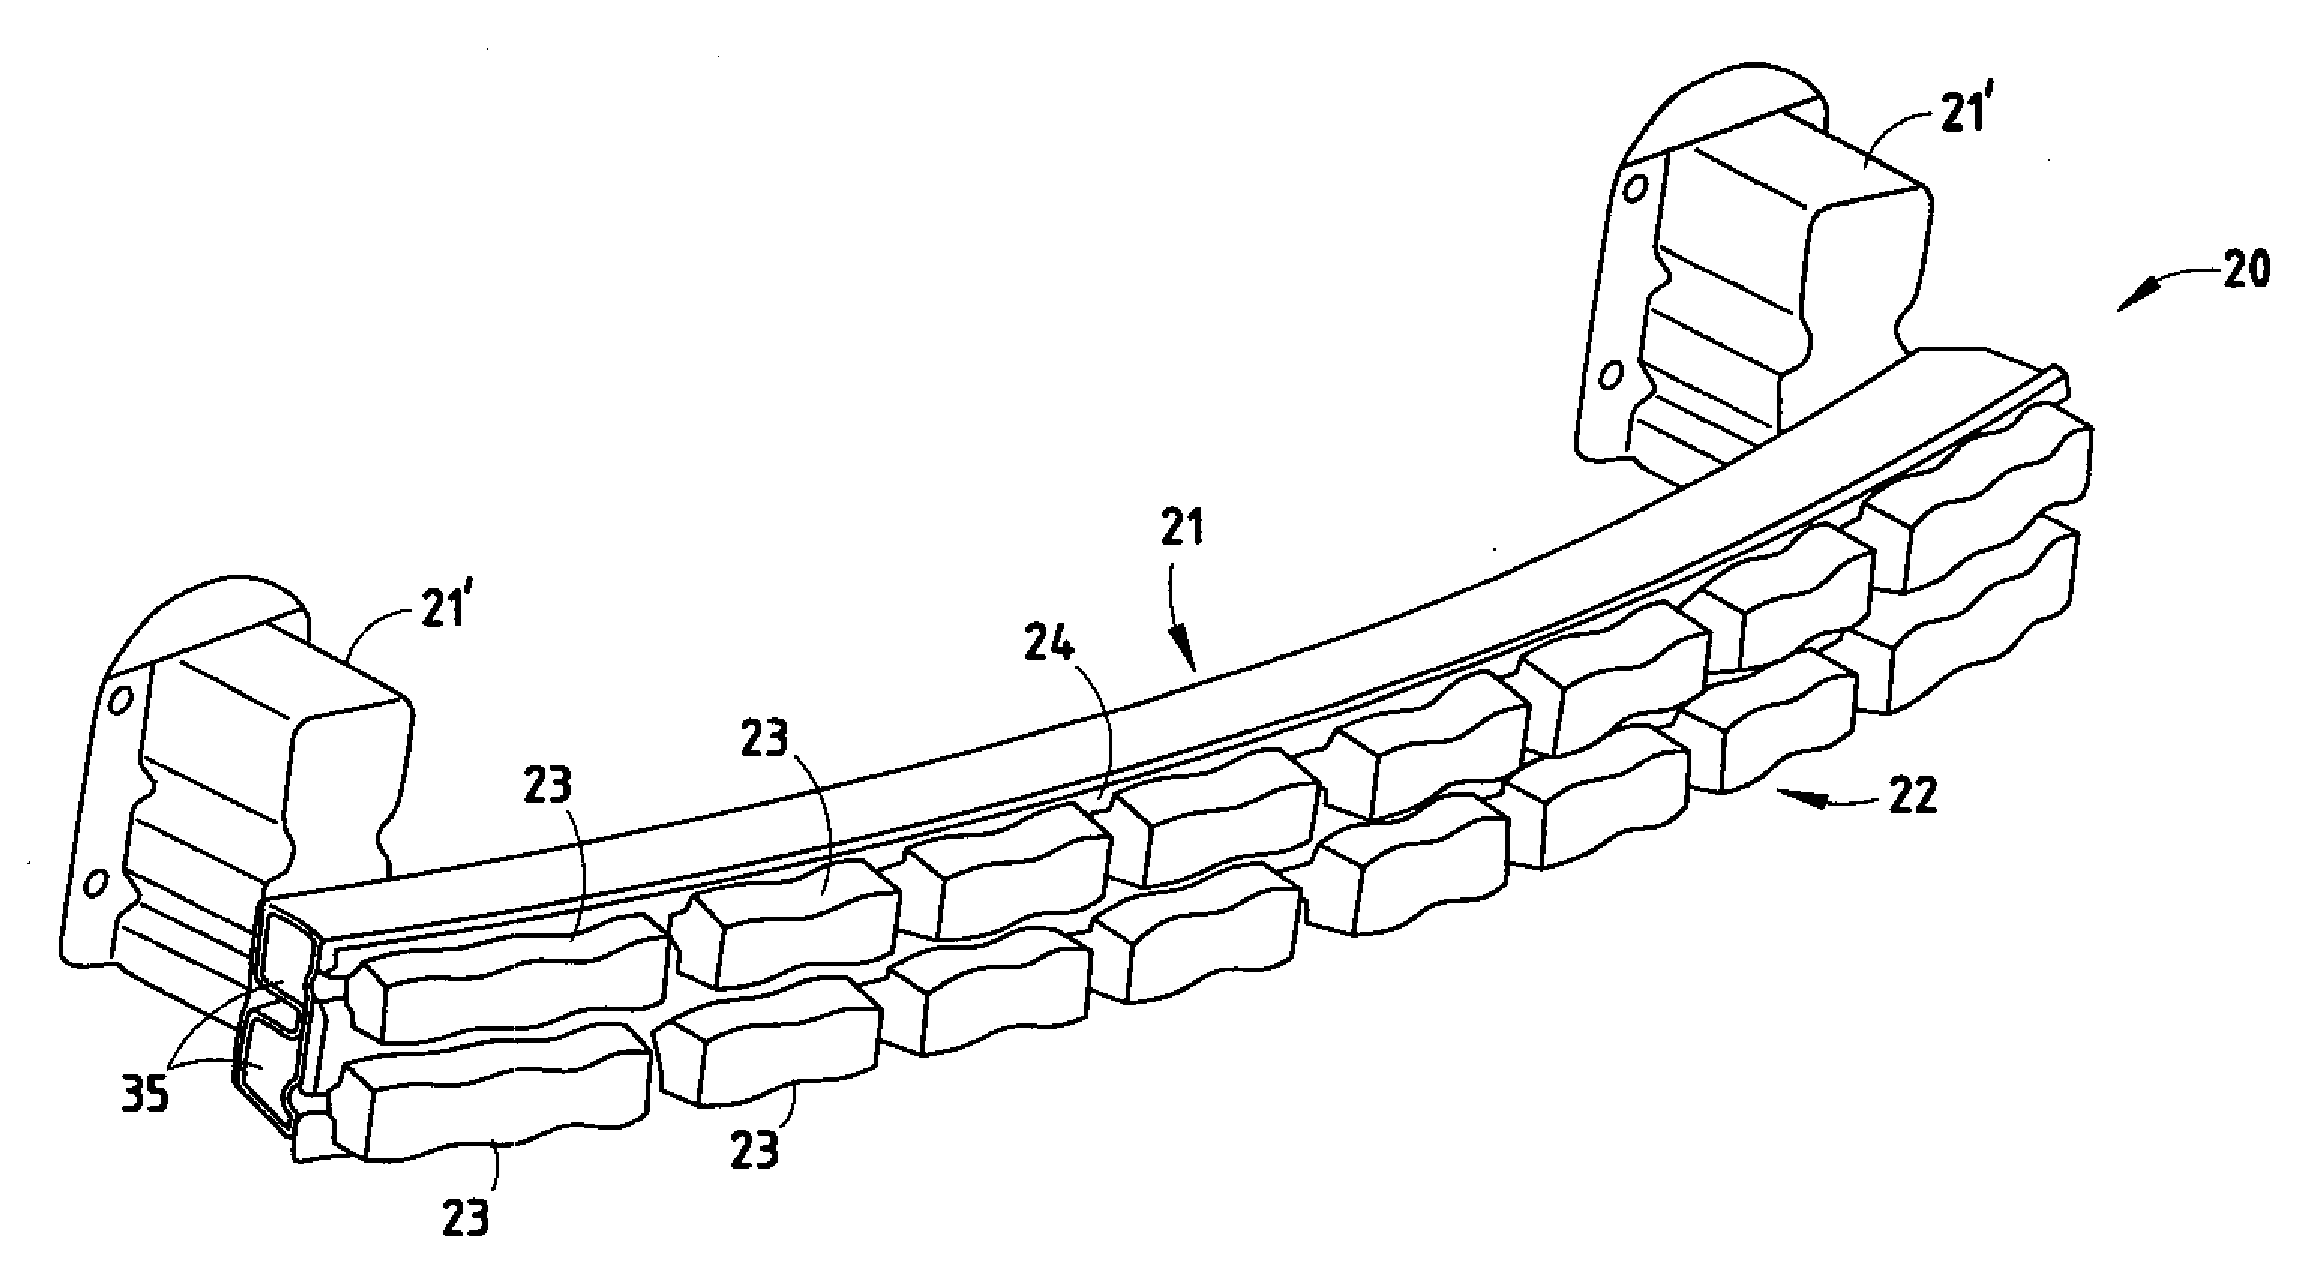 Method of constructing bumper incorporating thermoformed energy absorber